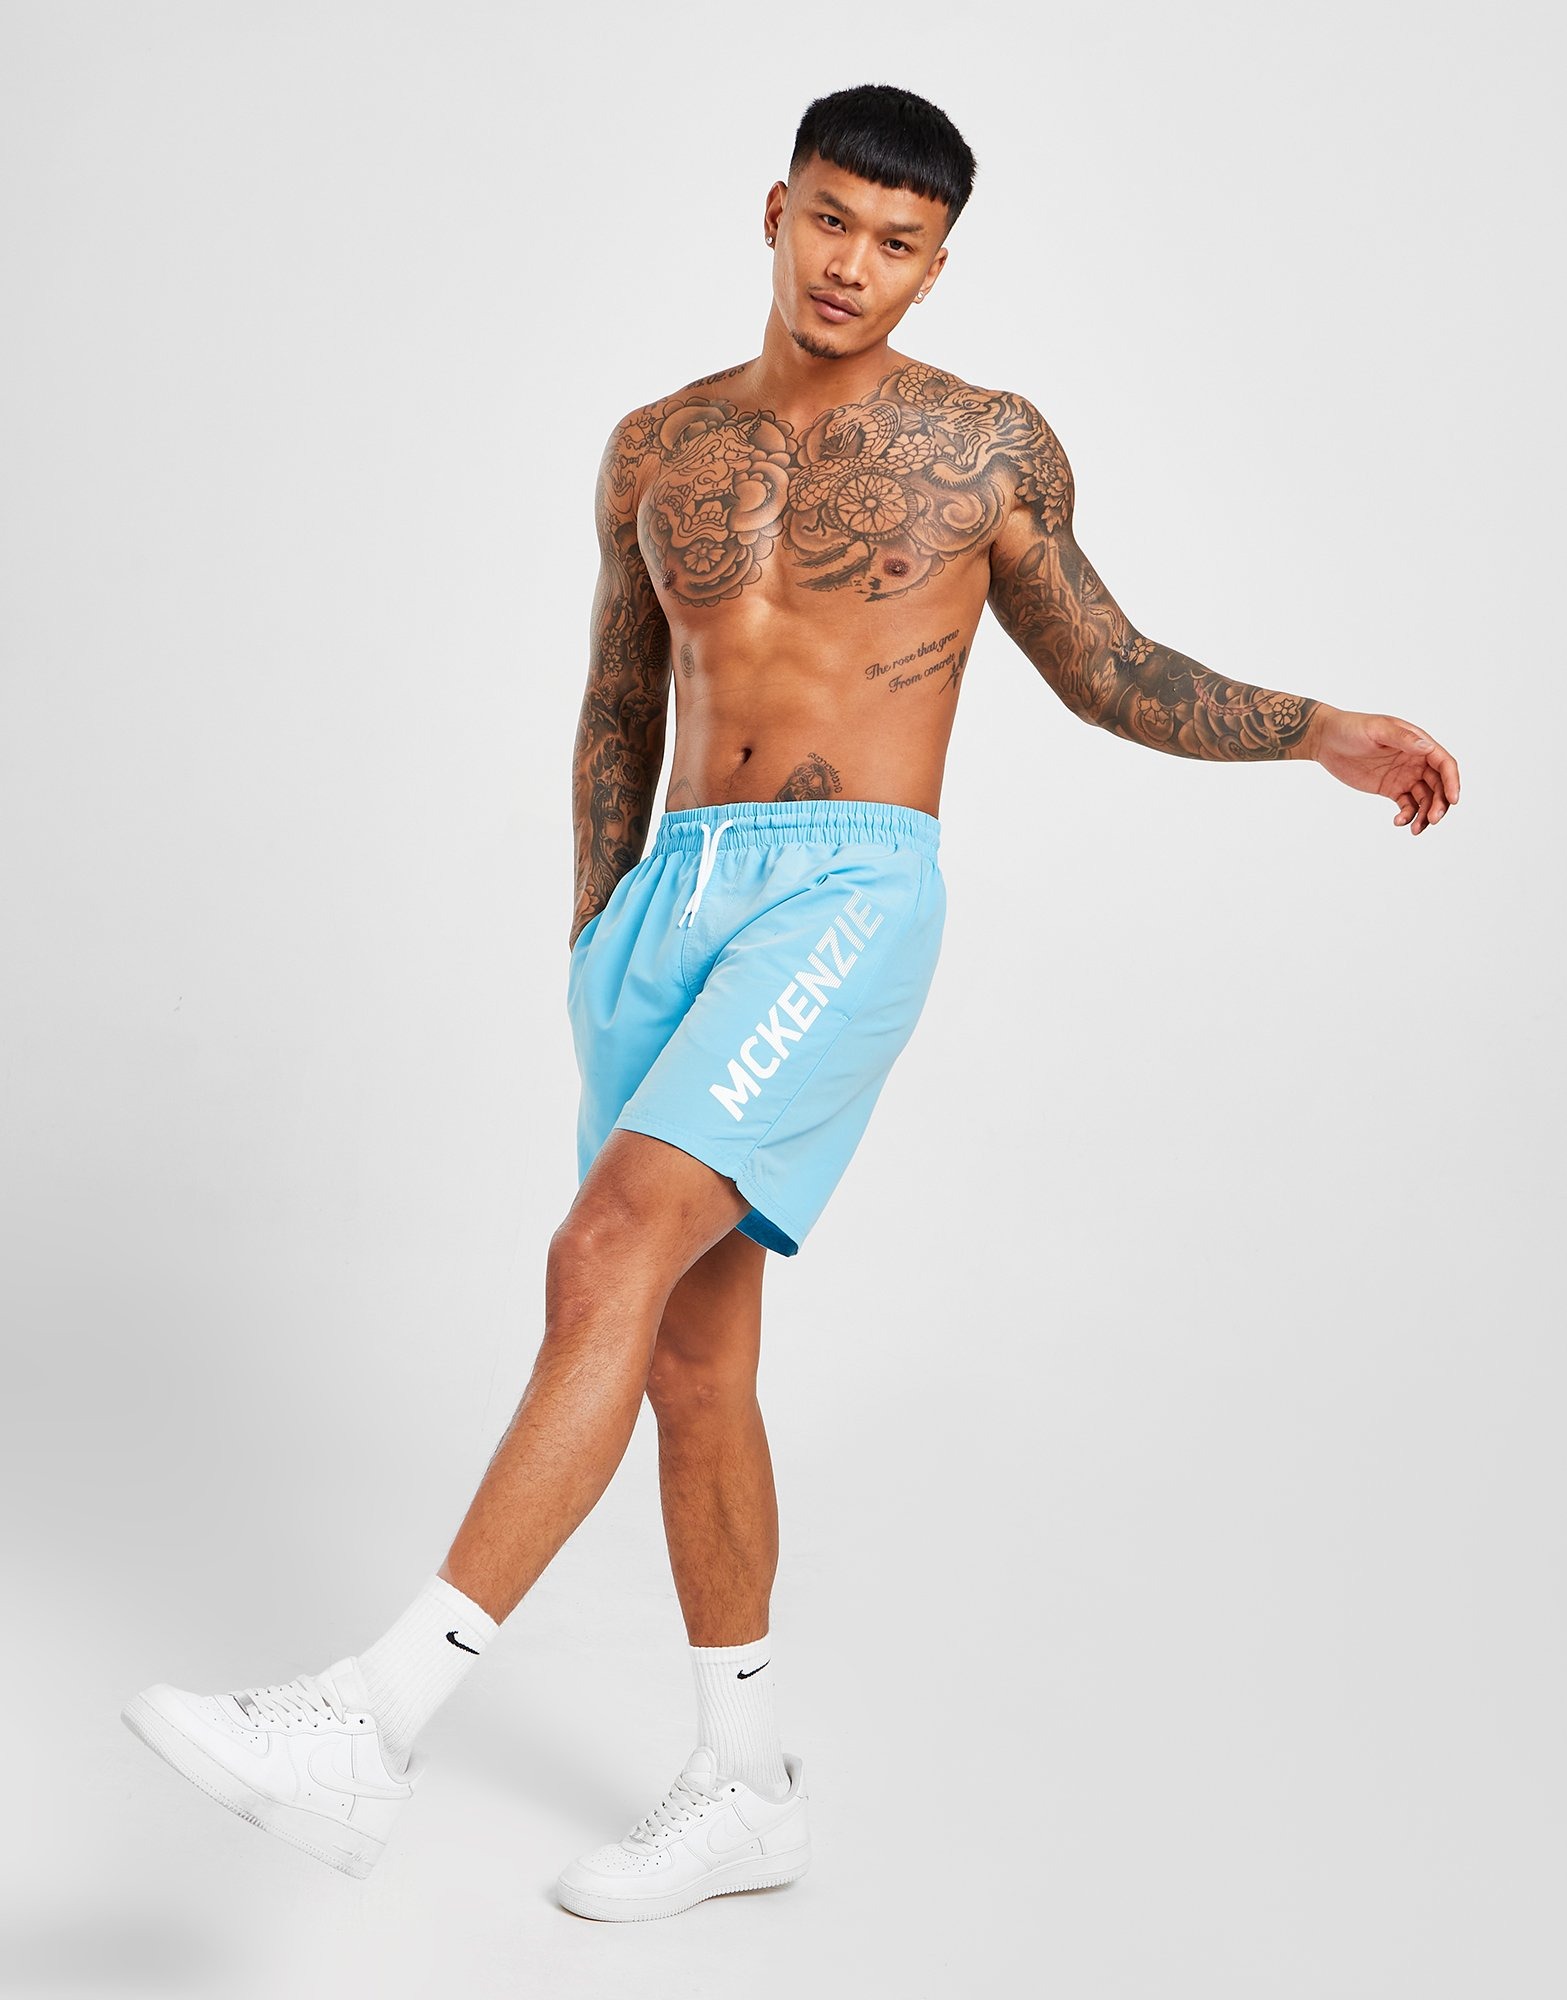 New McKenzie Men’s Essential Swim Shorts from JD Outlet 